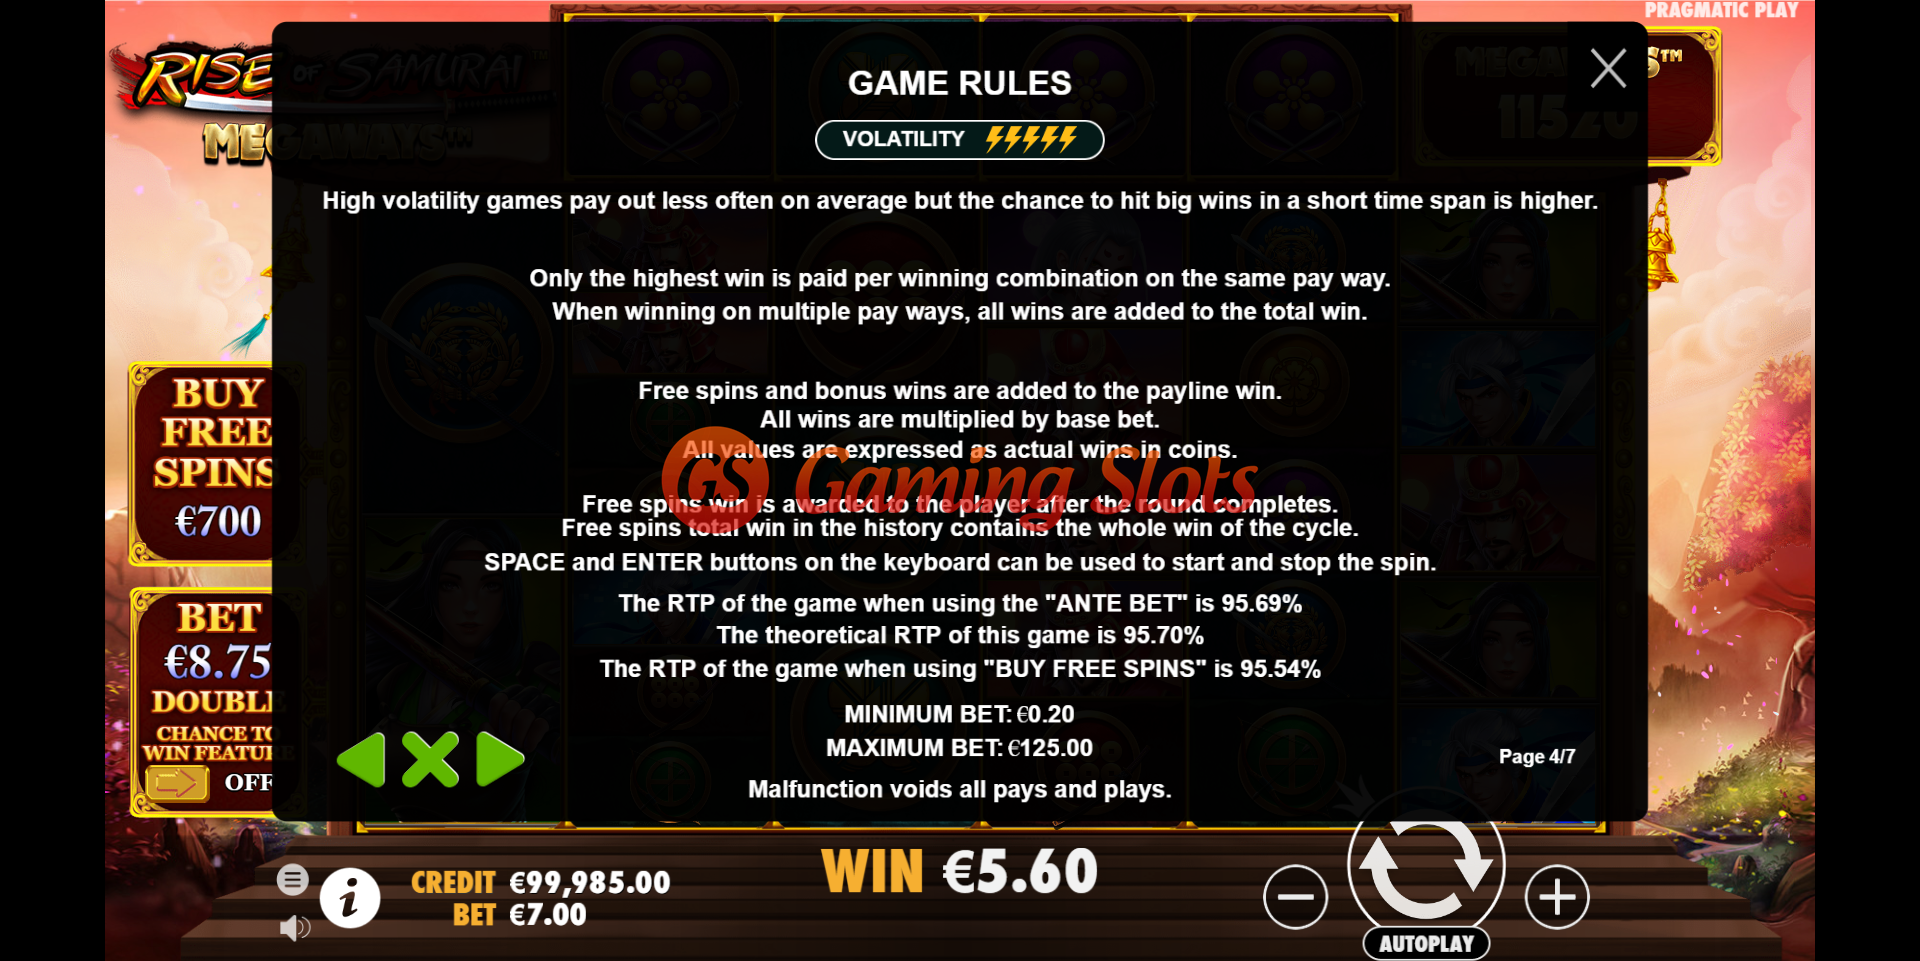 Game Rules for Rise of Samurai Megaways slot from Pragmatic Play